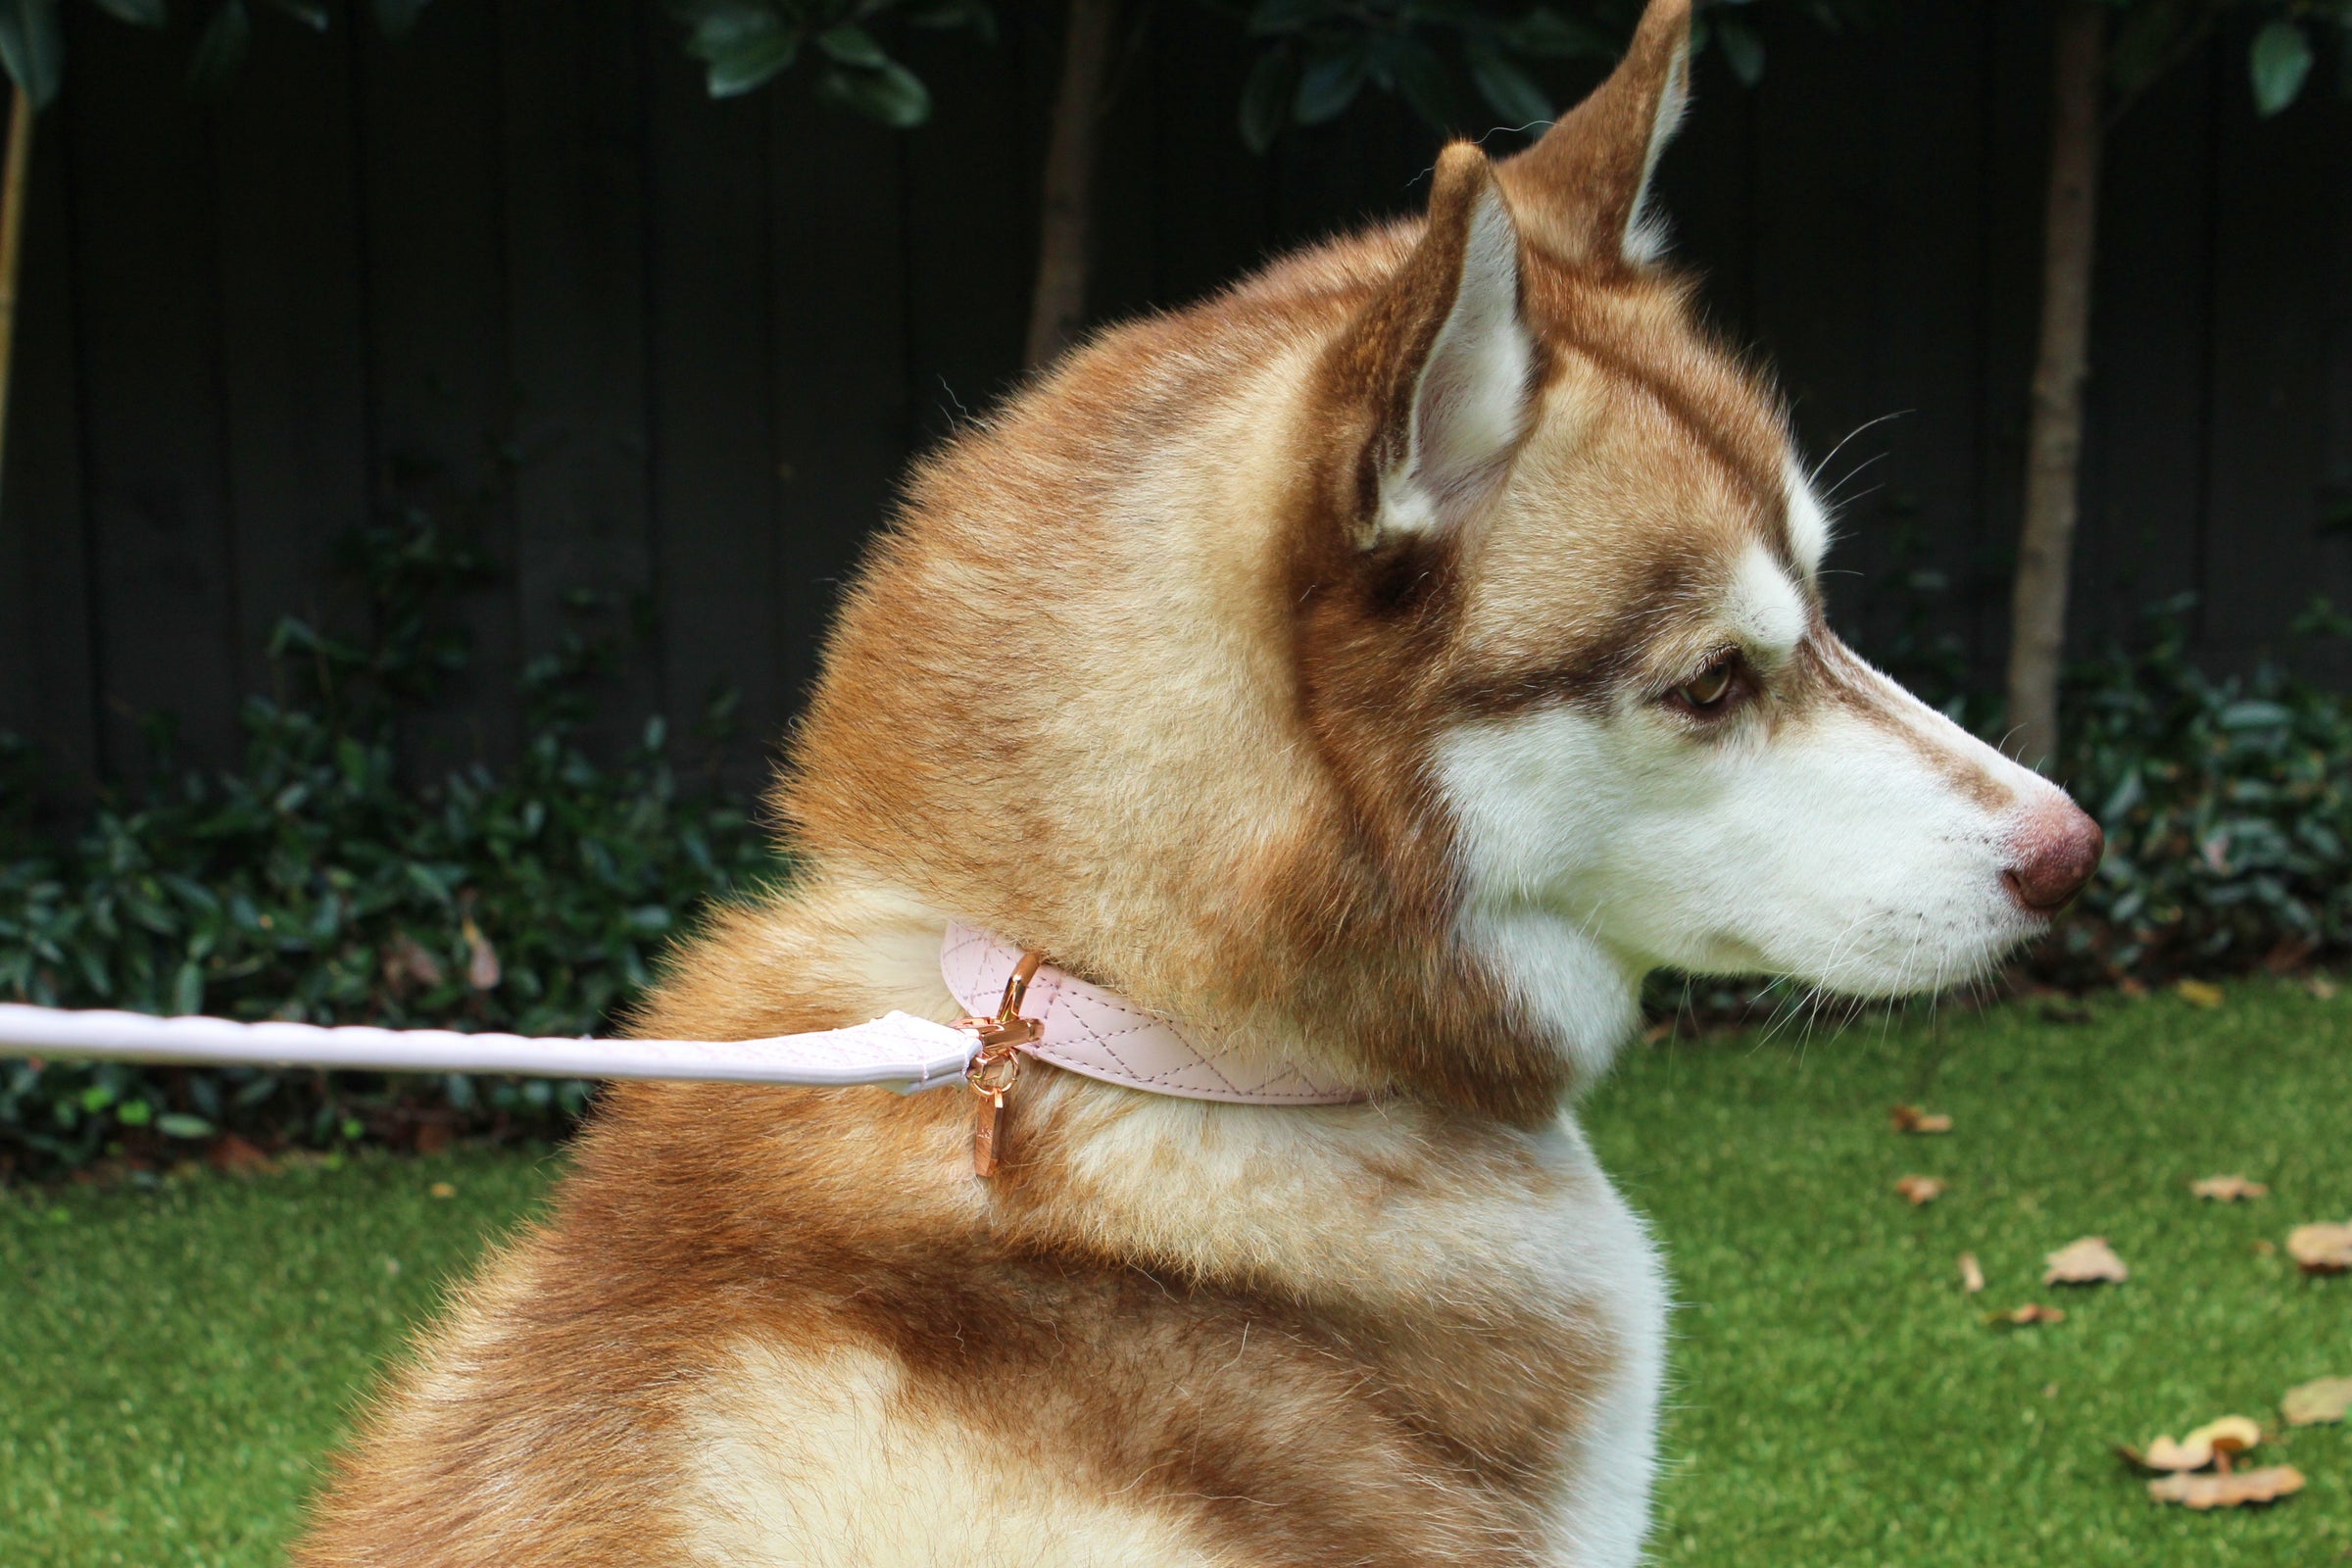 Walk Your Pet in Style, with our Excellent Range of Affordable Pet Collars